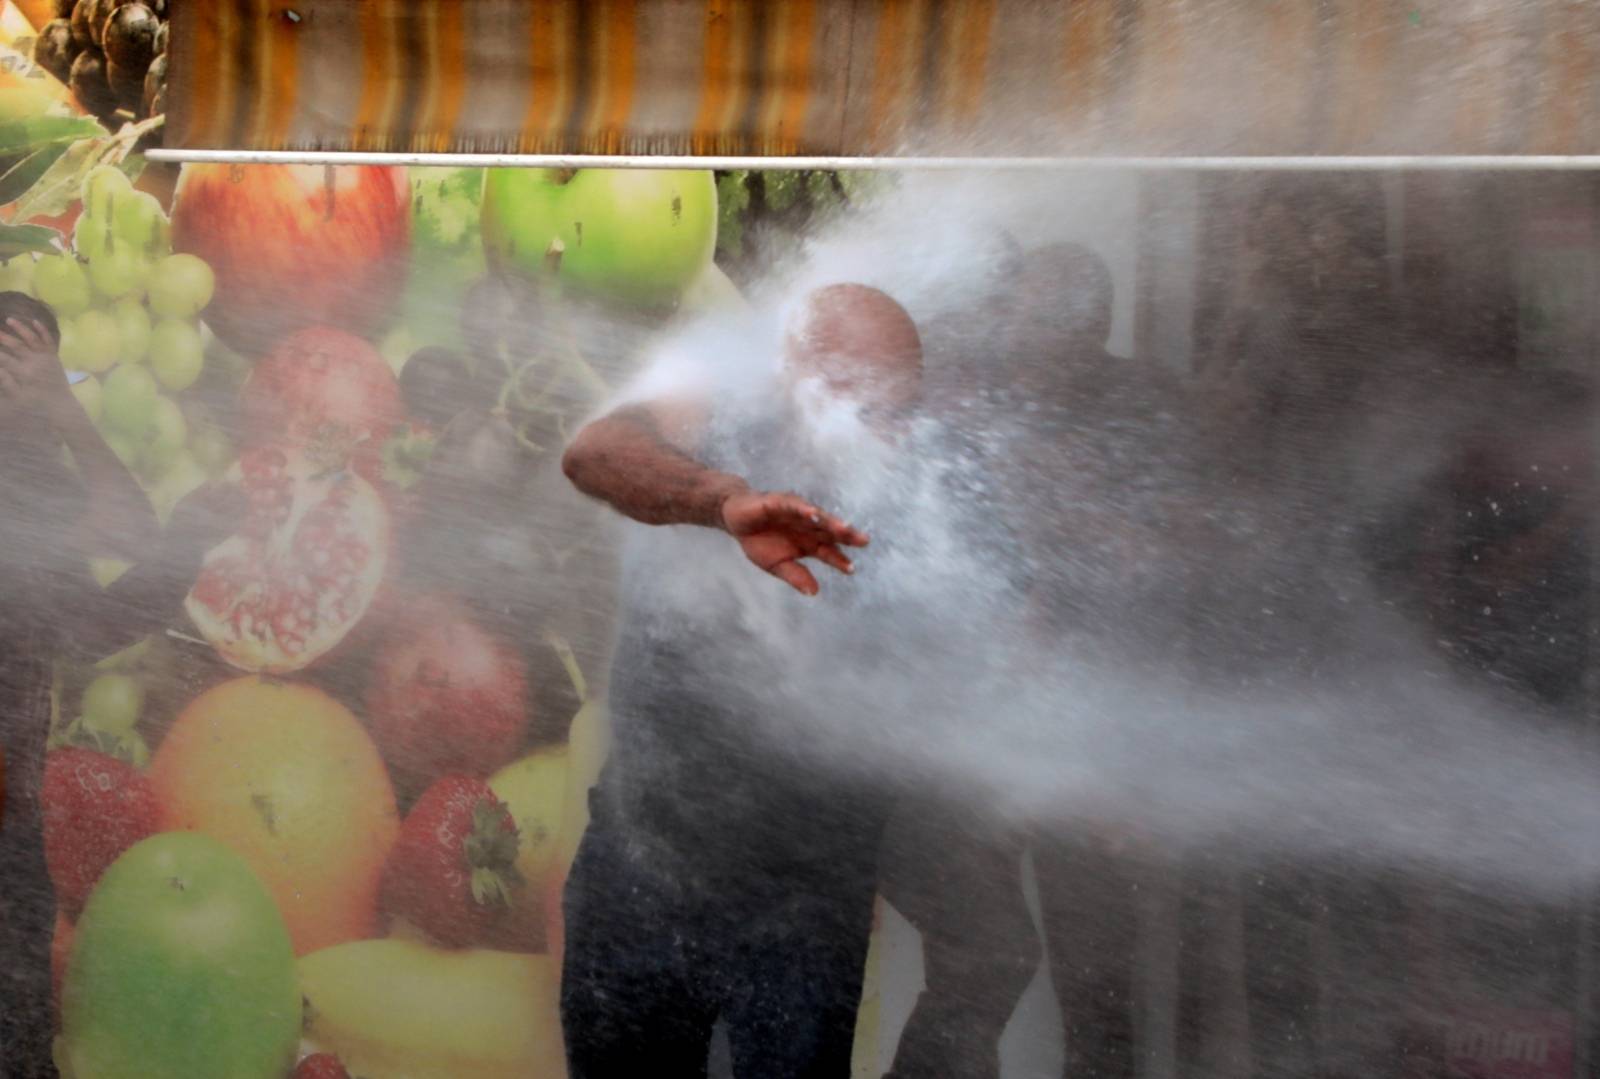 Turkish police use a water cannon to disperse demonstrators during a protest against the replacement of Kurdish mayors with state officials in three cities, in Diyarbakir